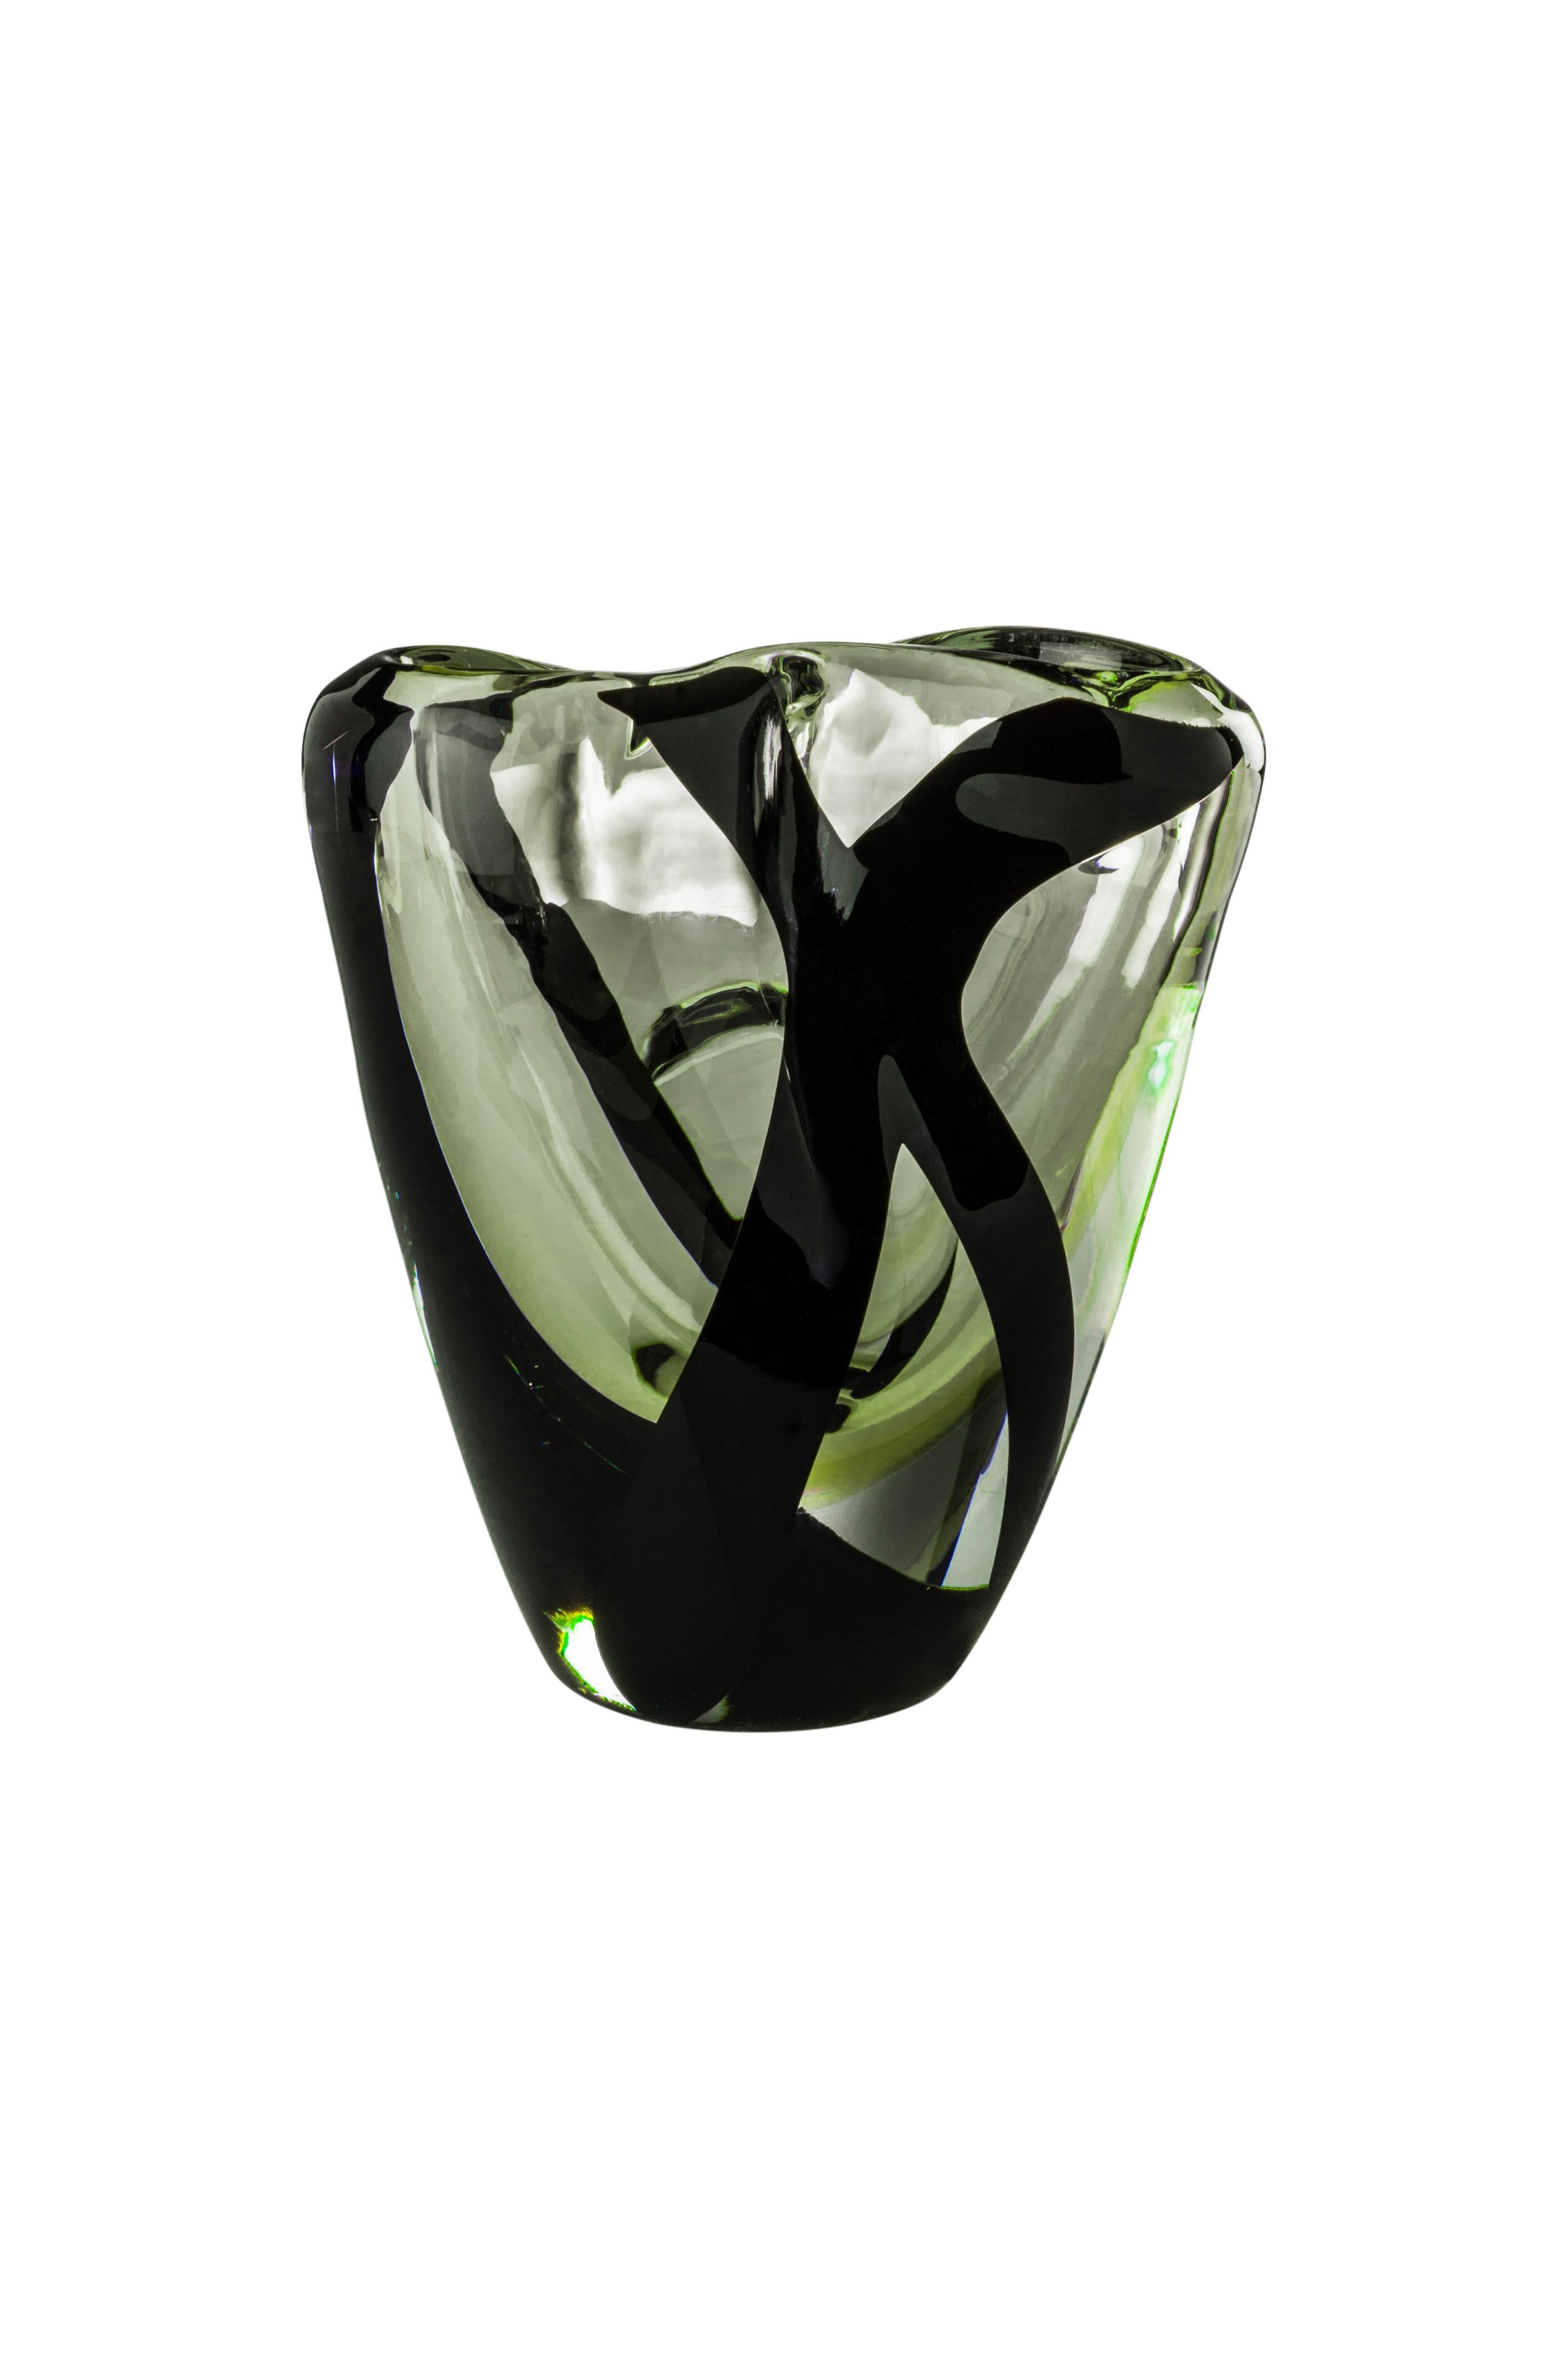 Venini glass vase in crystal and grass green with black decoration designed by Peter Marino in 2017. Perfect for indoor home decor as container or statement piece for any room. Also available in other colors on 1stdibs. Limited edition of only 349